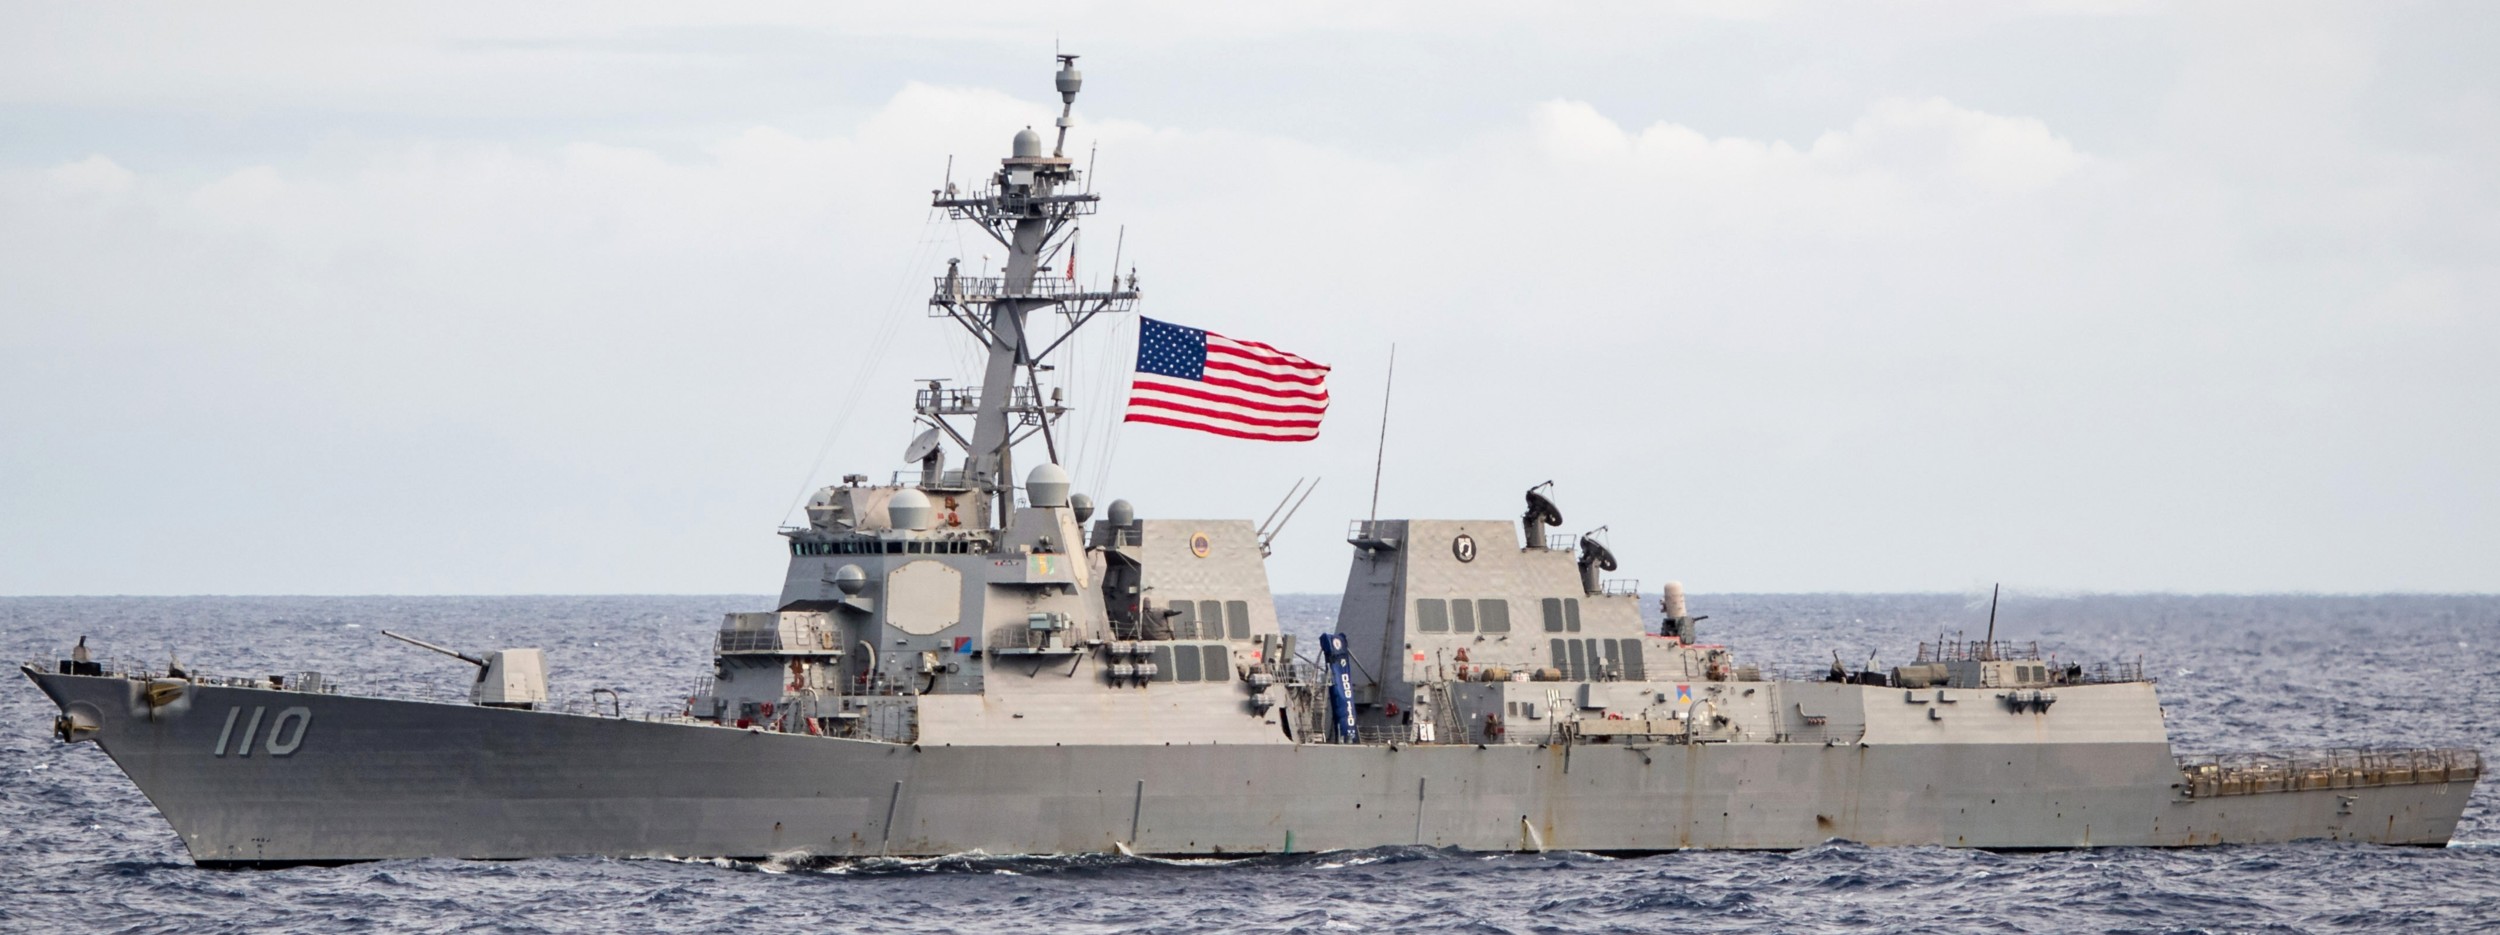 ddg-110 uss william p. lawrence arleigh burke class guided missile destroyer aegis us navy exercise rimpac 2018 43